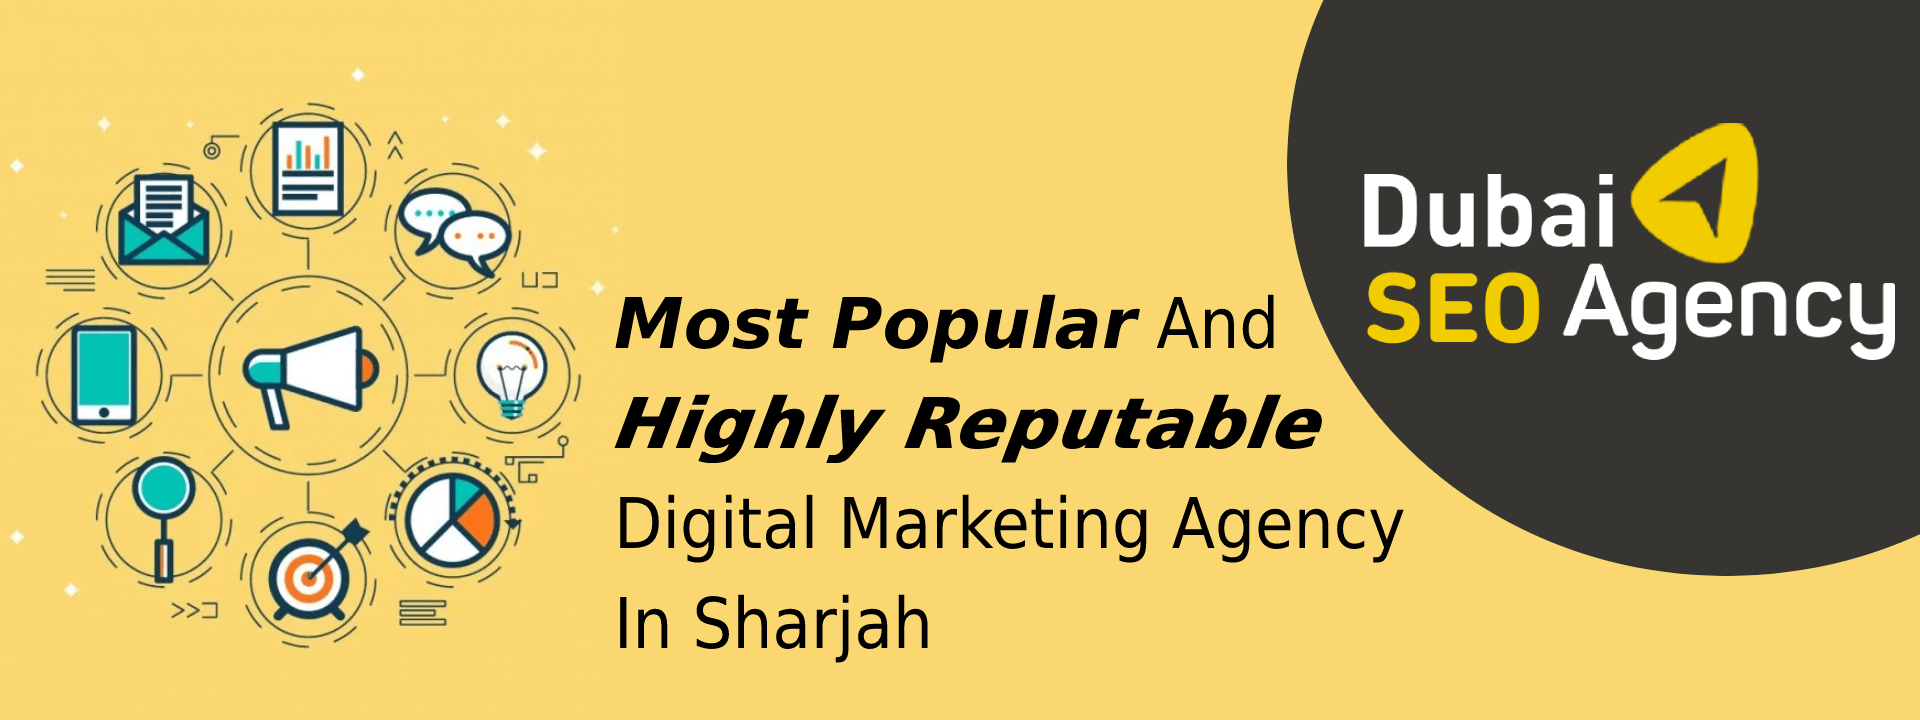 Most Popular And Highly Reputable Digital Marketing Agency In Sharjah